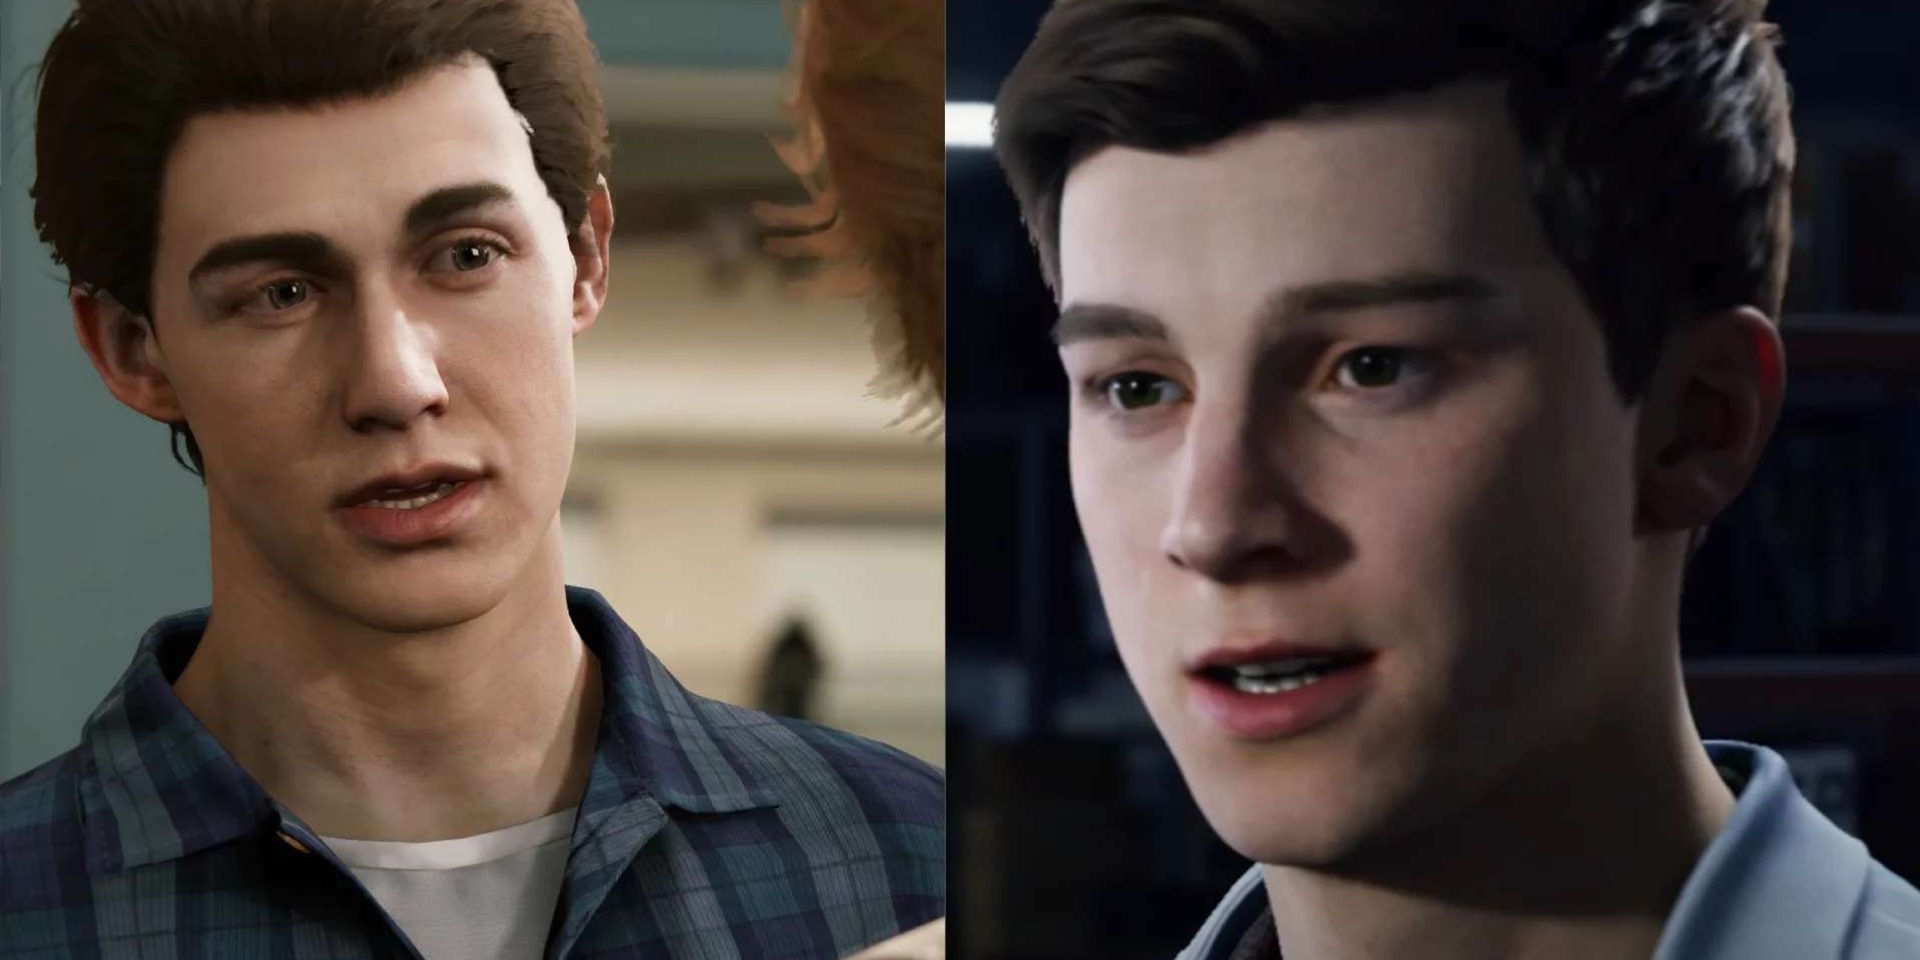 Insomniac Peter Parker's models on the PS4 and PS5